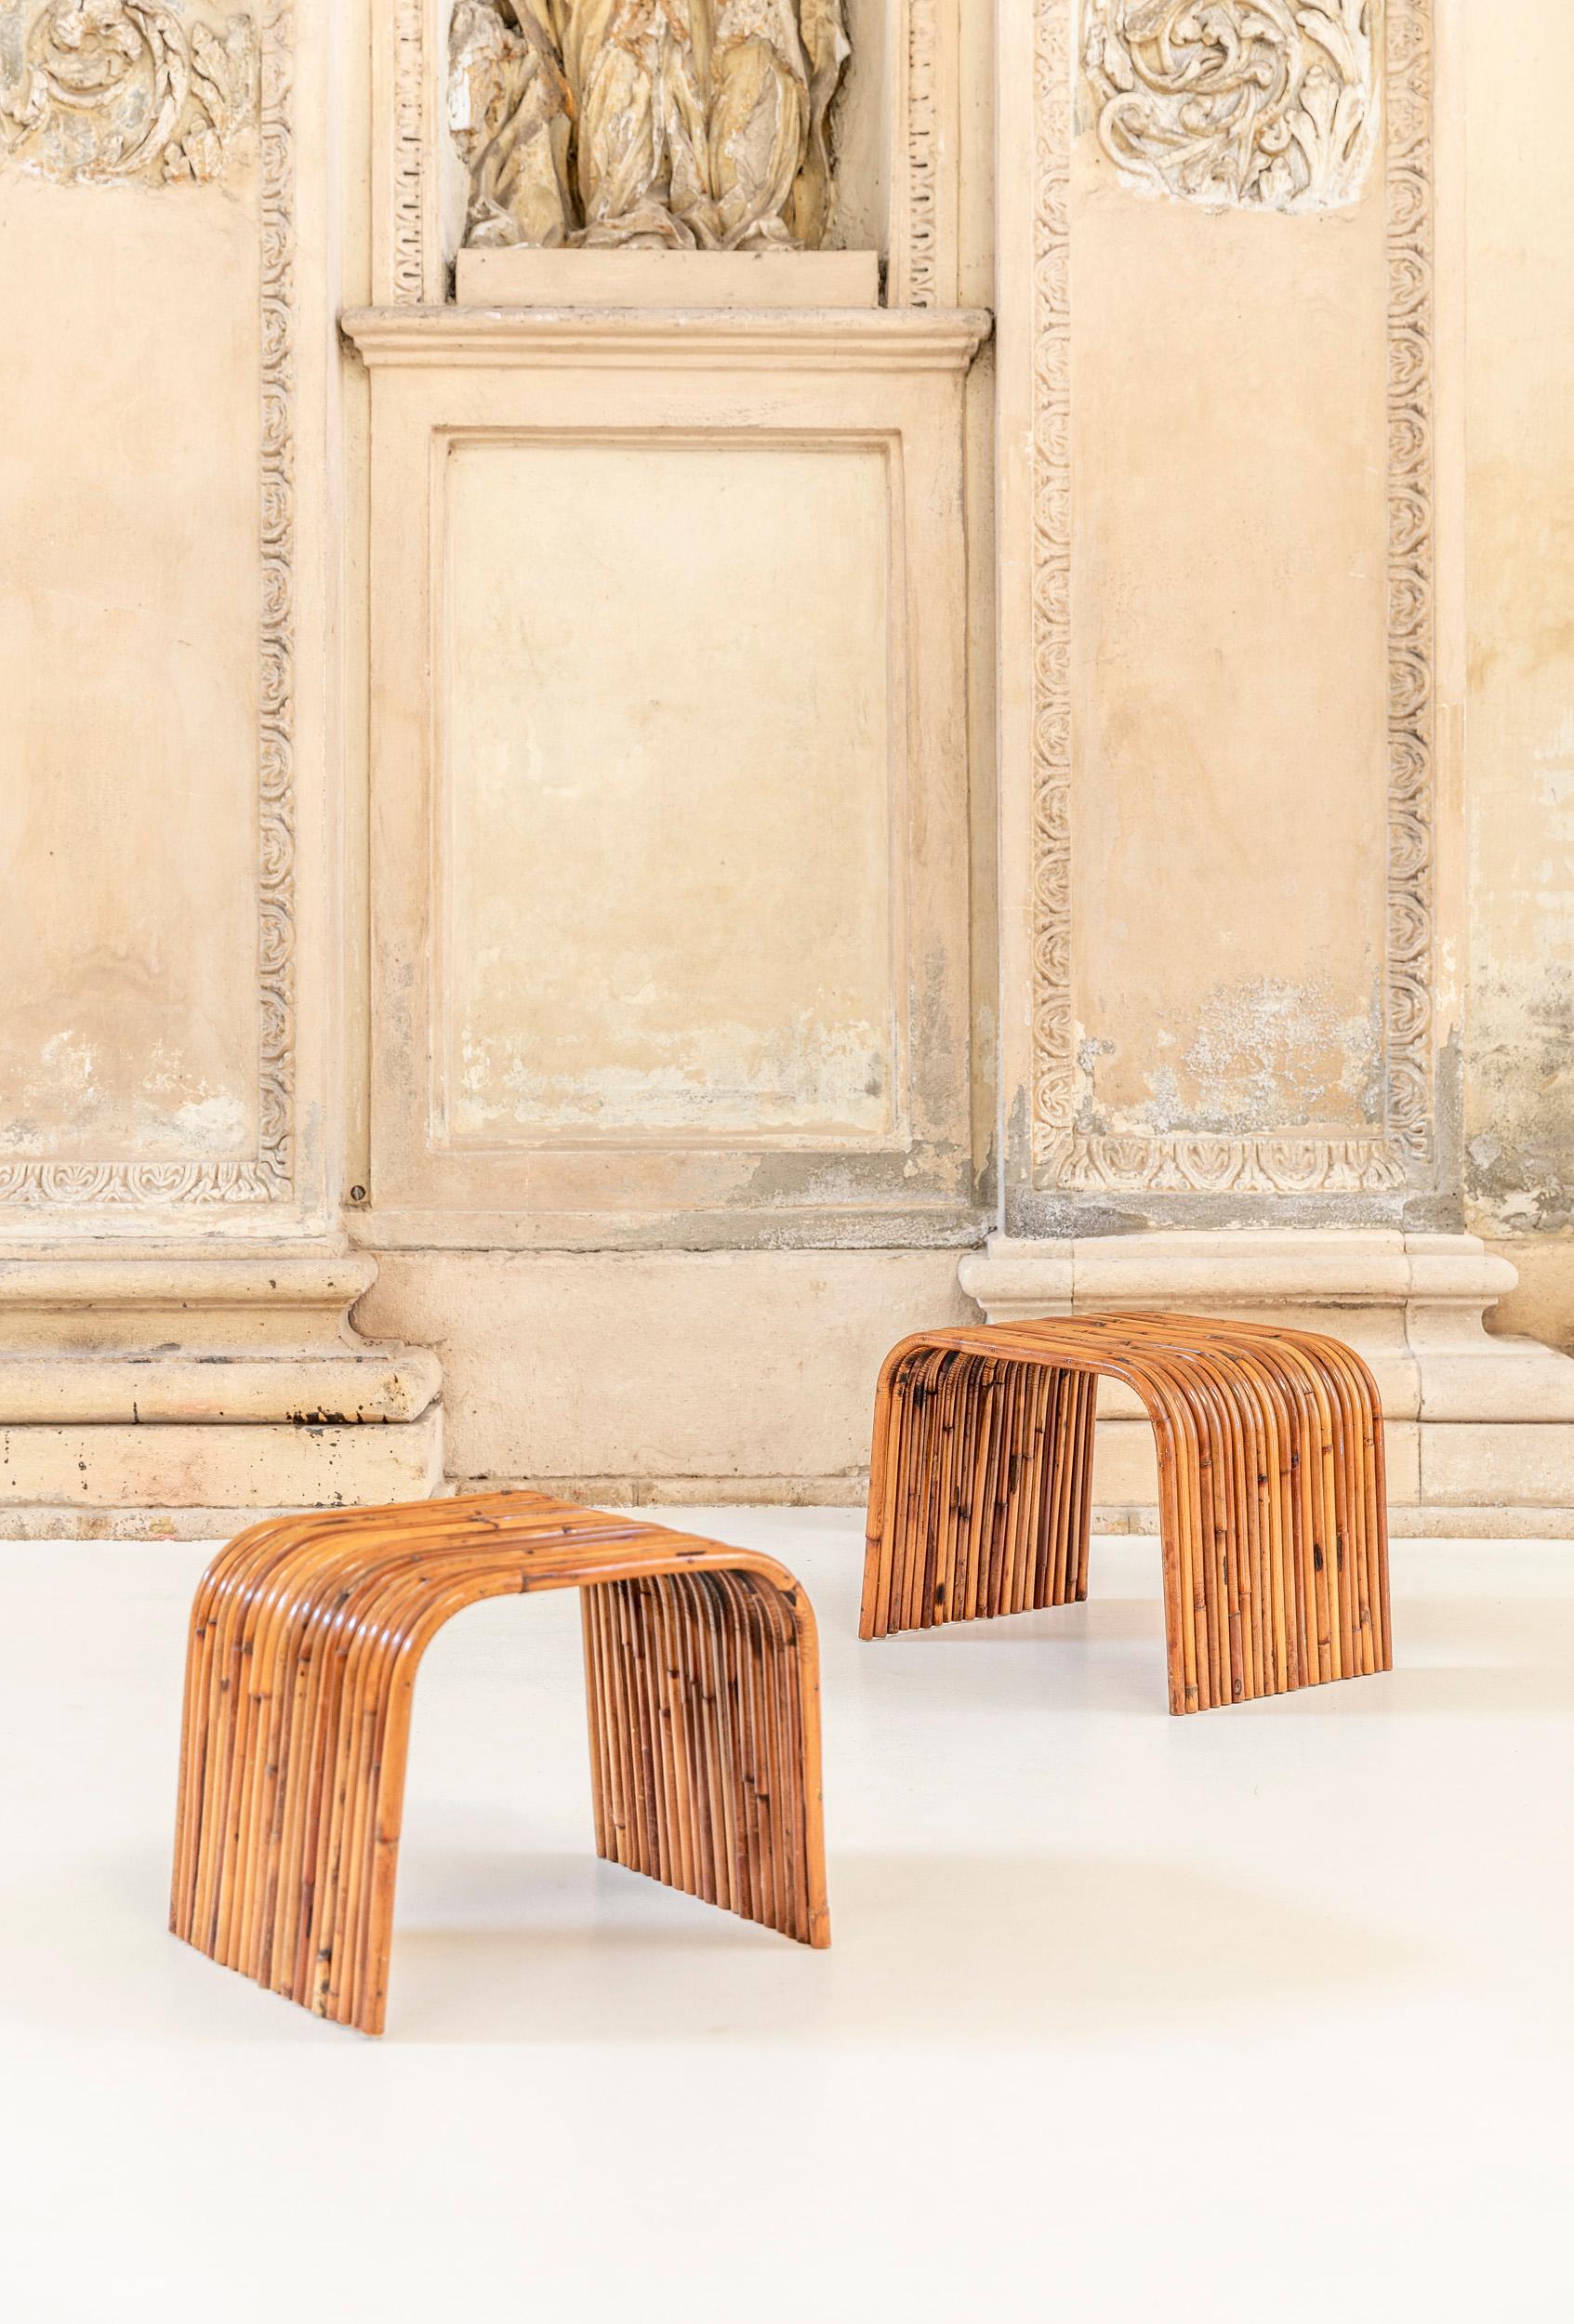 Gabriella Crespi Bamboo Console Table, Italy 1975, Certificated 8